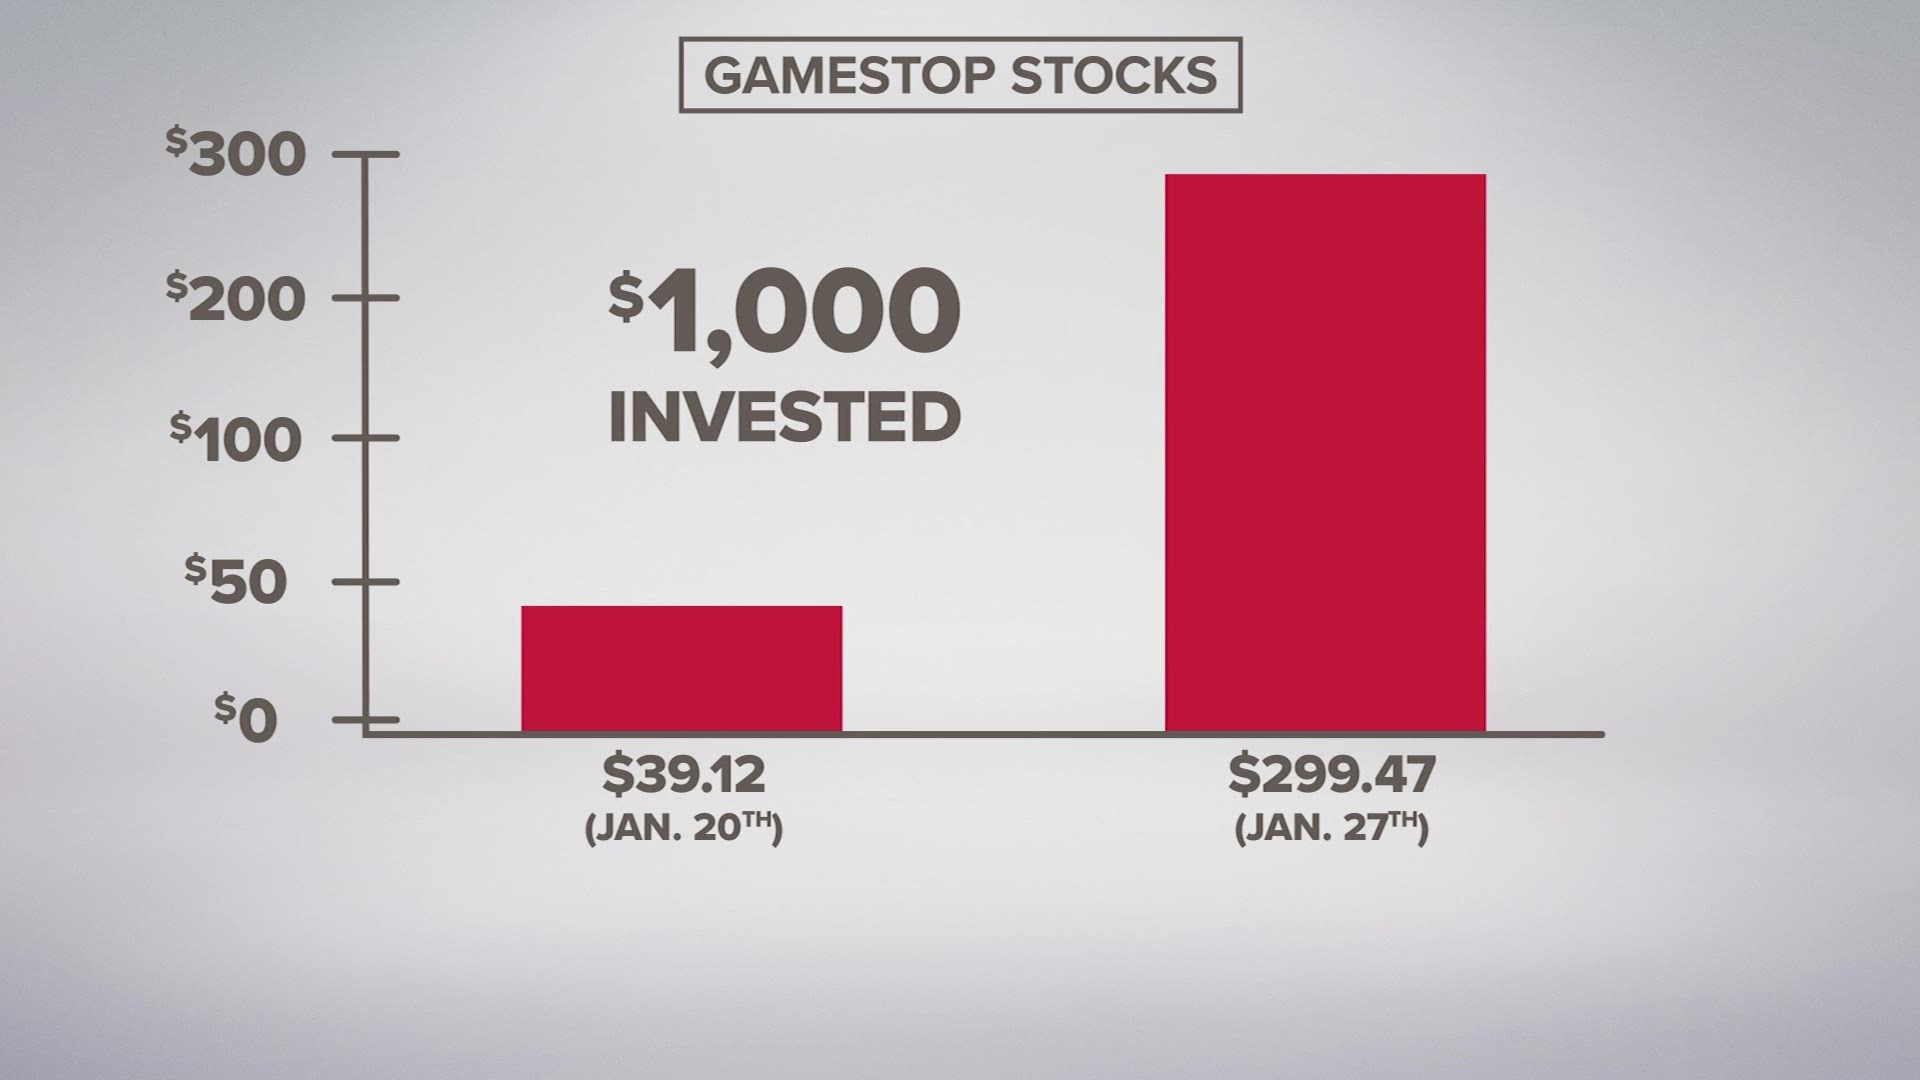 During a pandemic, the brick and mortar video game store GameStop has turned into a rising star on Wall Street.